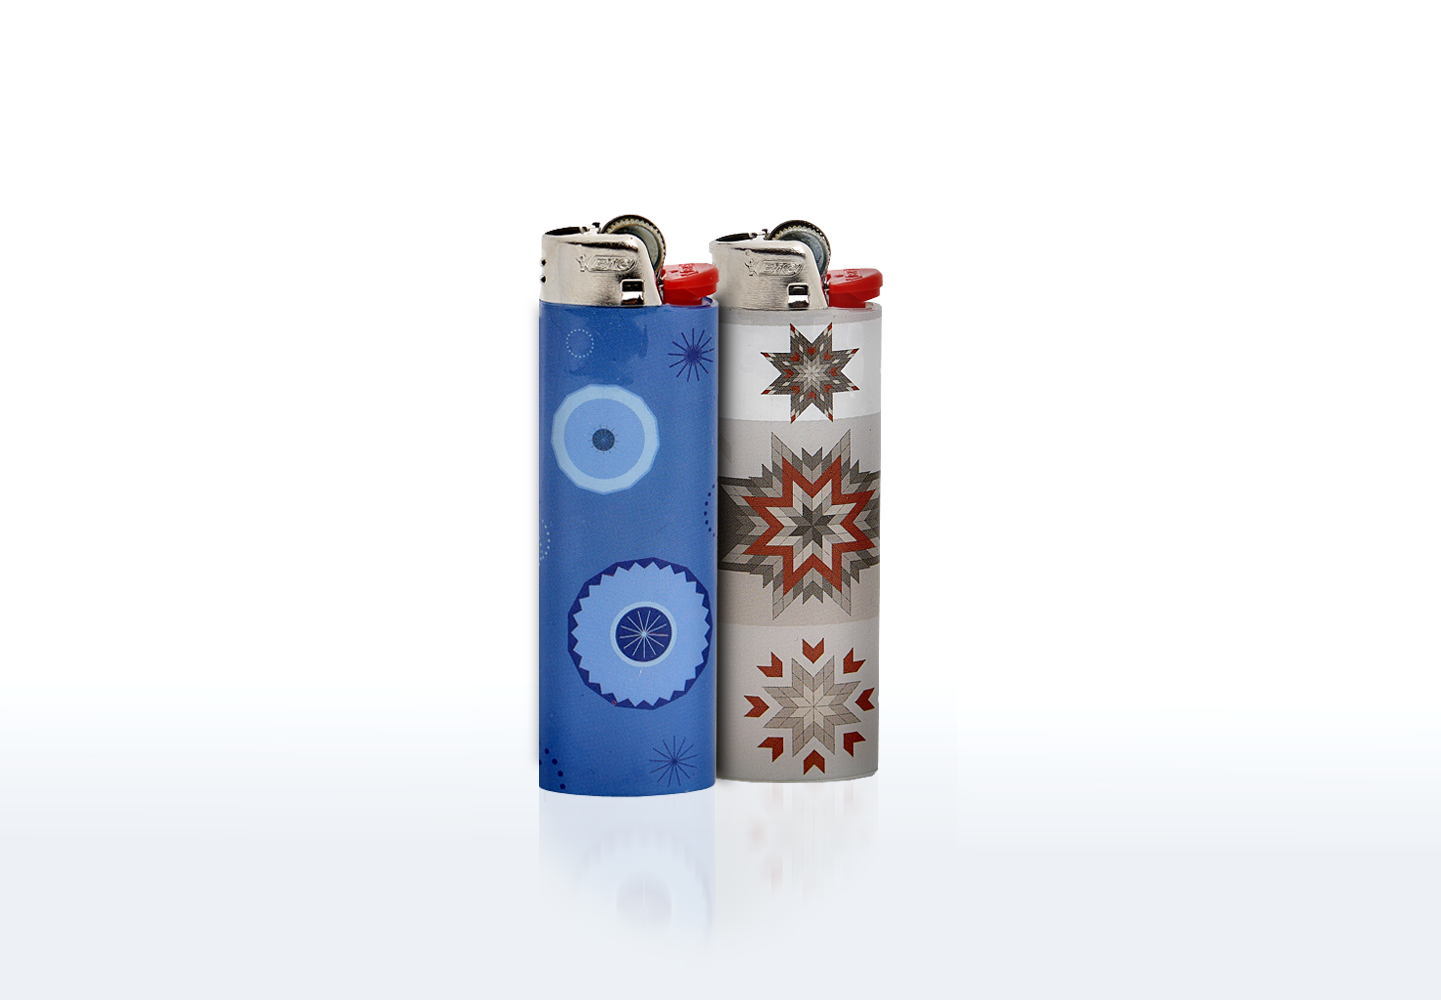 Bic Lighters - Quality that lasts